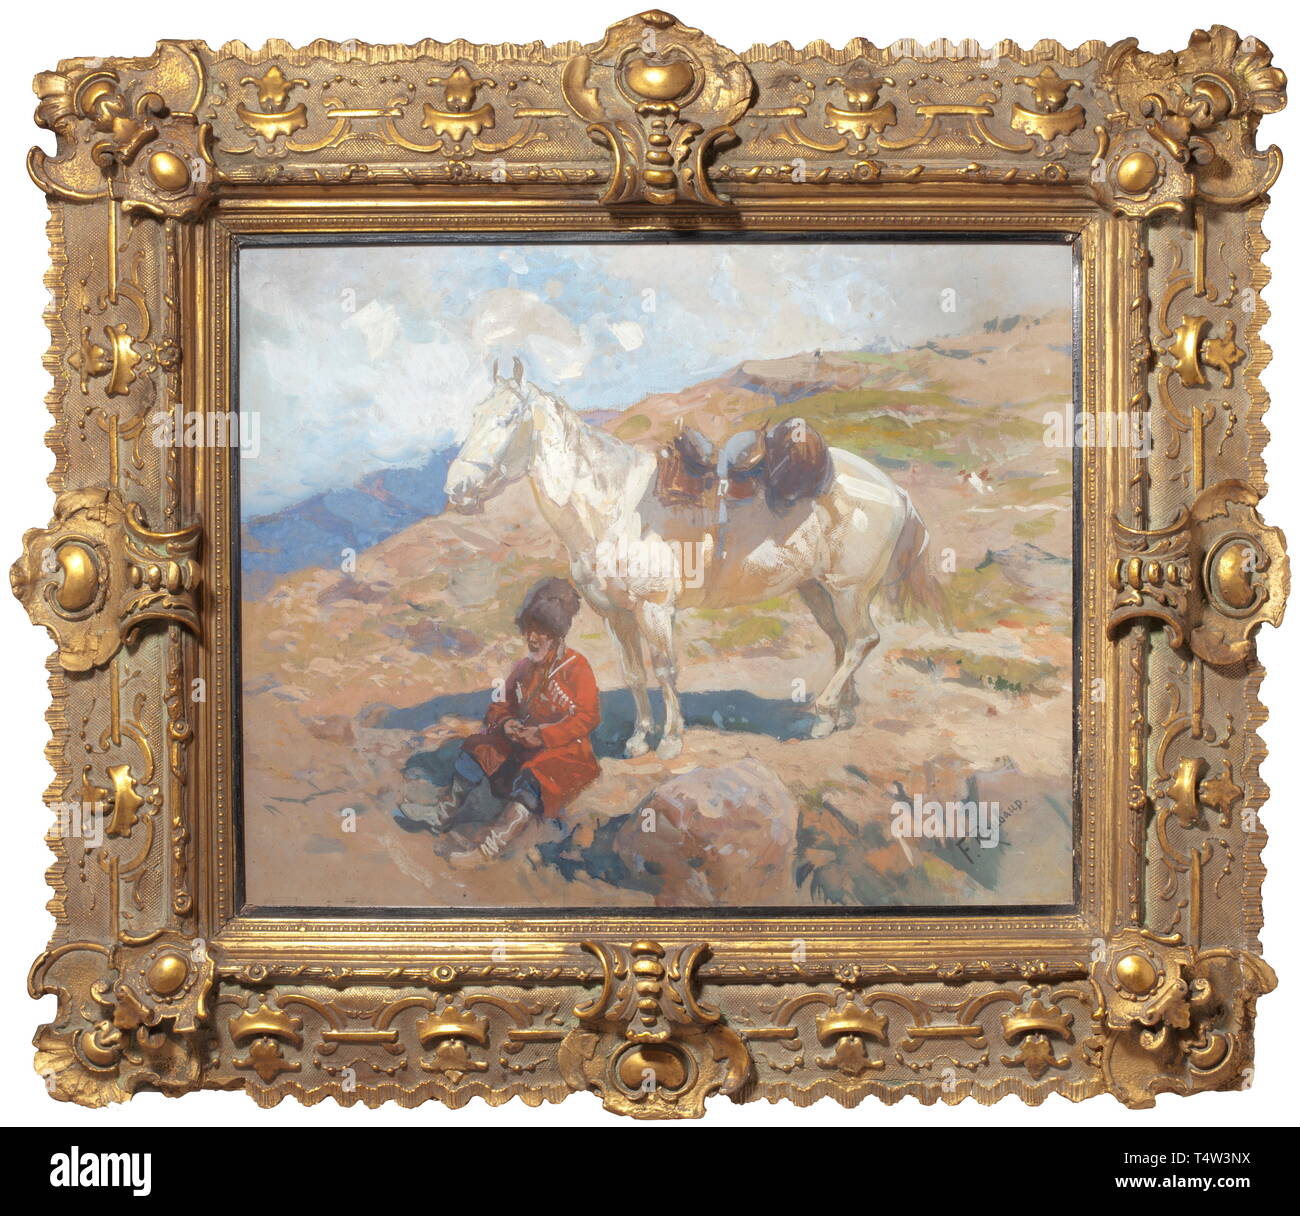 Franz Roubaud (1856 - 1928) - 'Resting Cossack'. Gouache on cardboard. Sitting Cossack with fur cap and boots in front of his saddled white horse in a mountainous landscape. Signed at lower right 'F. Roubaud'. Behind glass in a gilt, elaborate stucco frame (knocked in places). Picture dimensions 70 x 56 cm, frame dimensions 98 x 86 cm. historic, historical, 20th century, 19th century, Additional-Rights-Clearance-Info-Not-Available Stock Photo